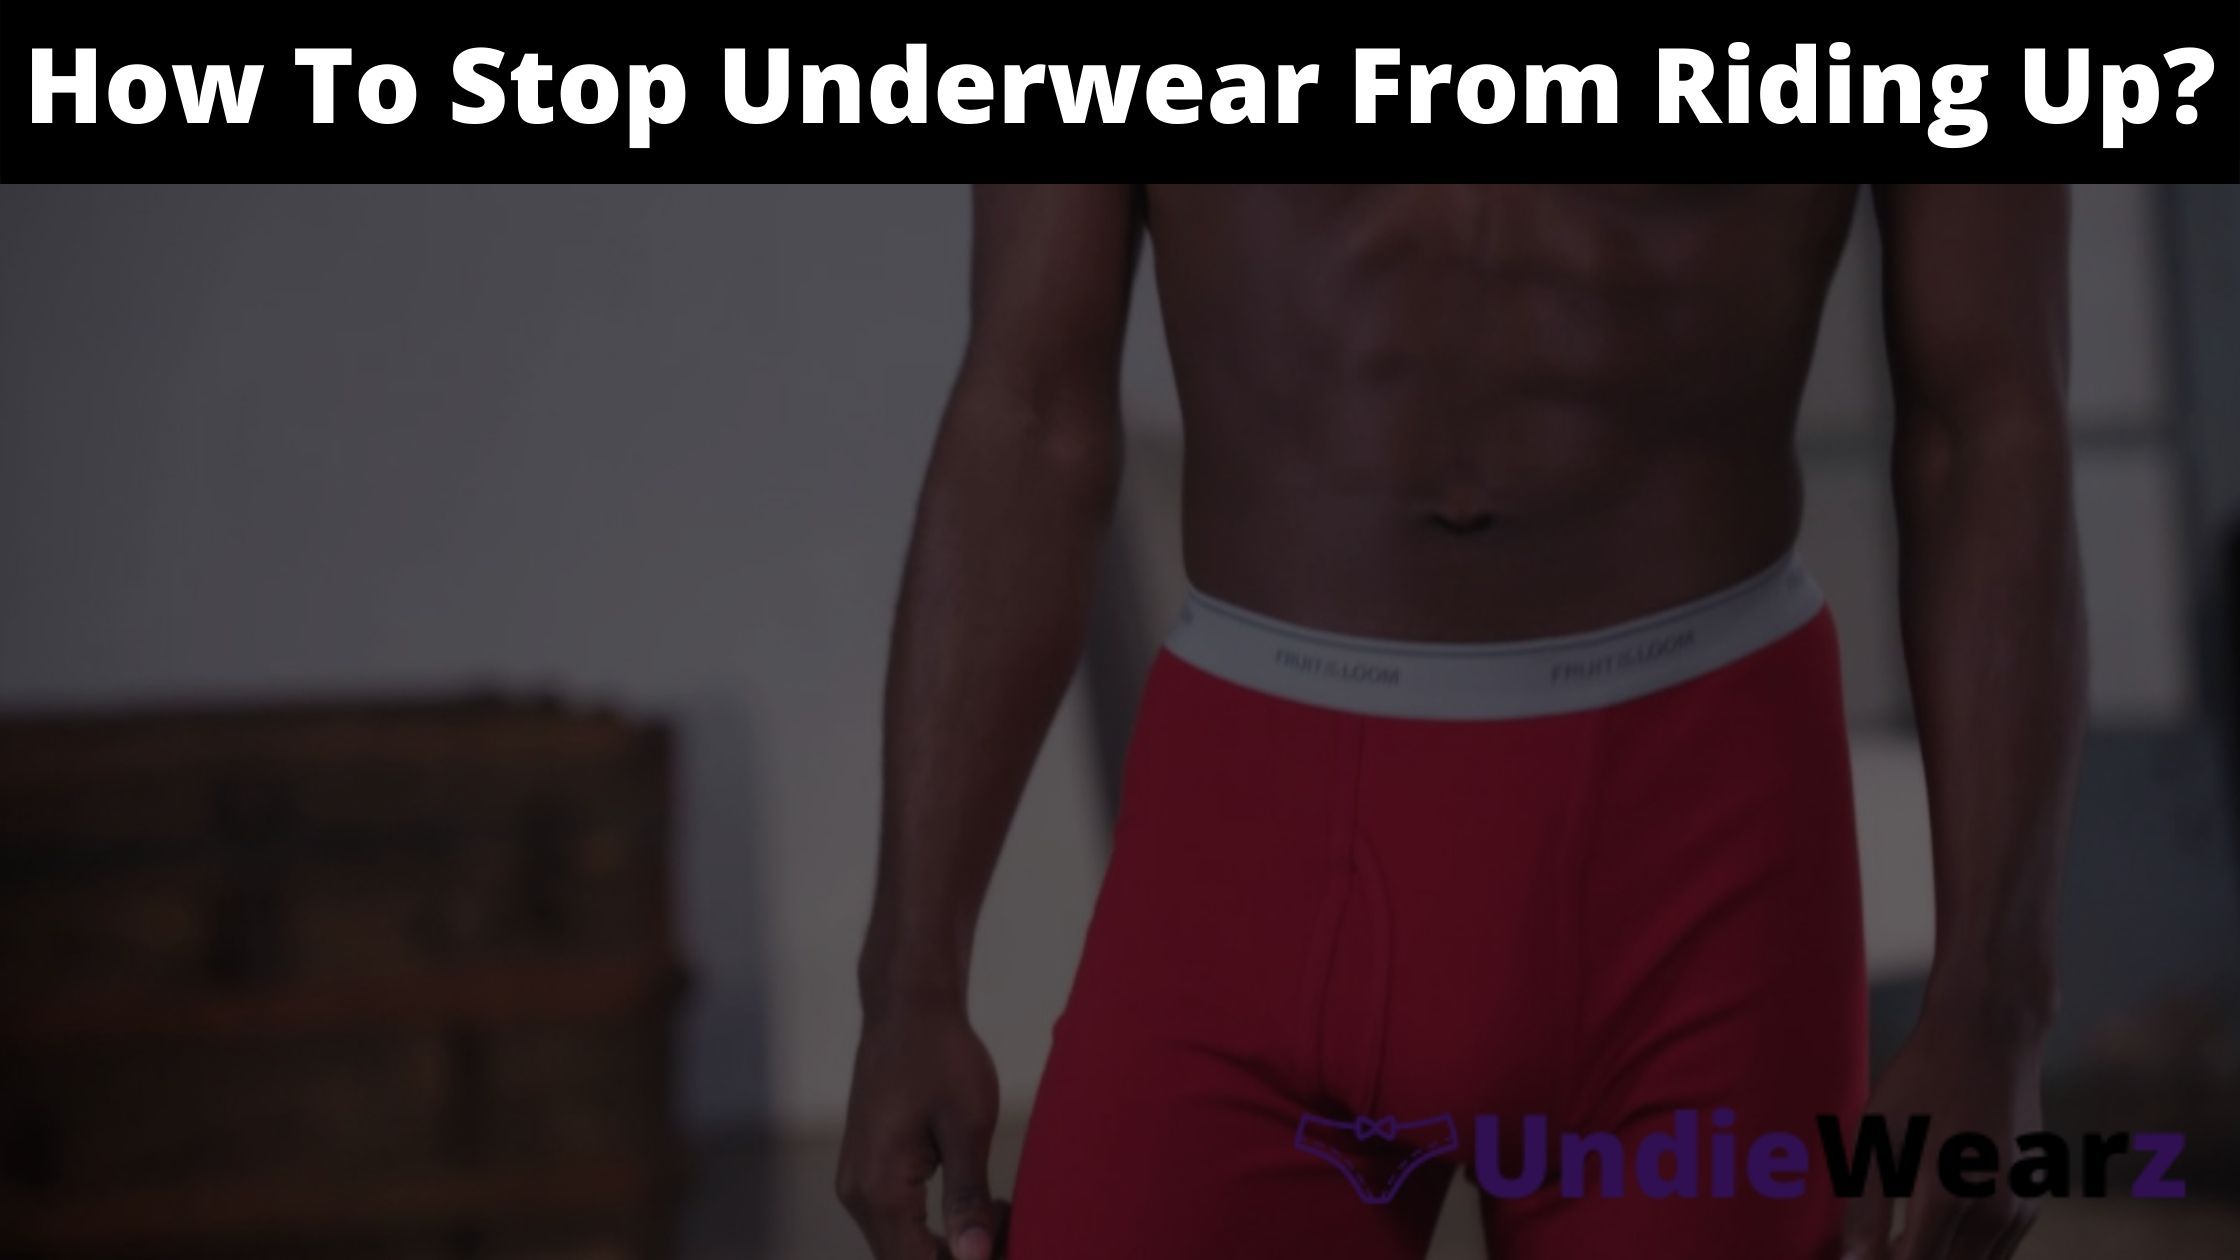 How To Stop Underwear From Riding Up